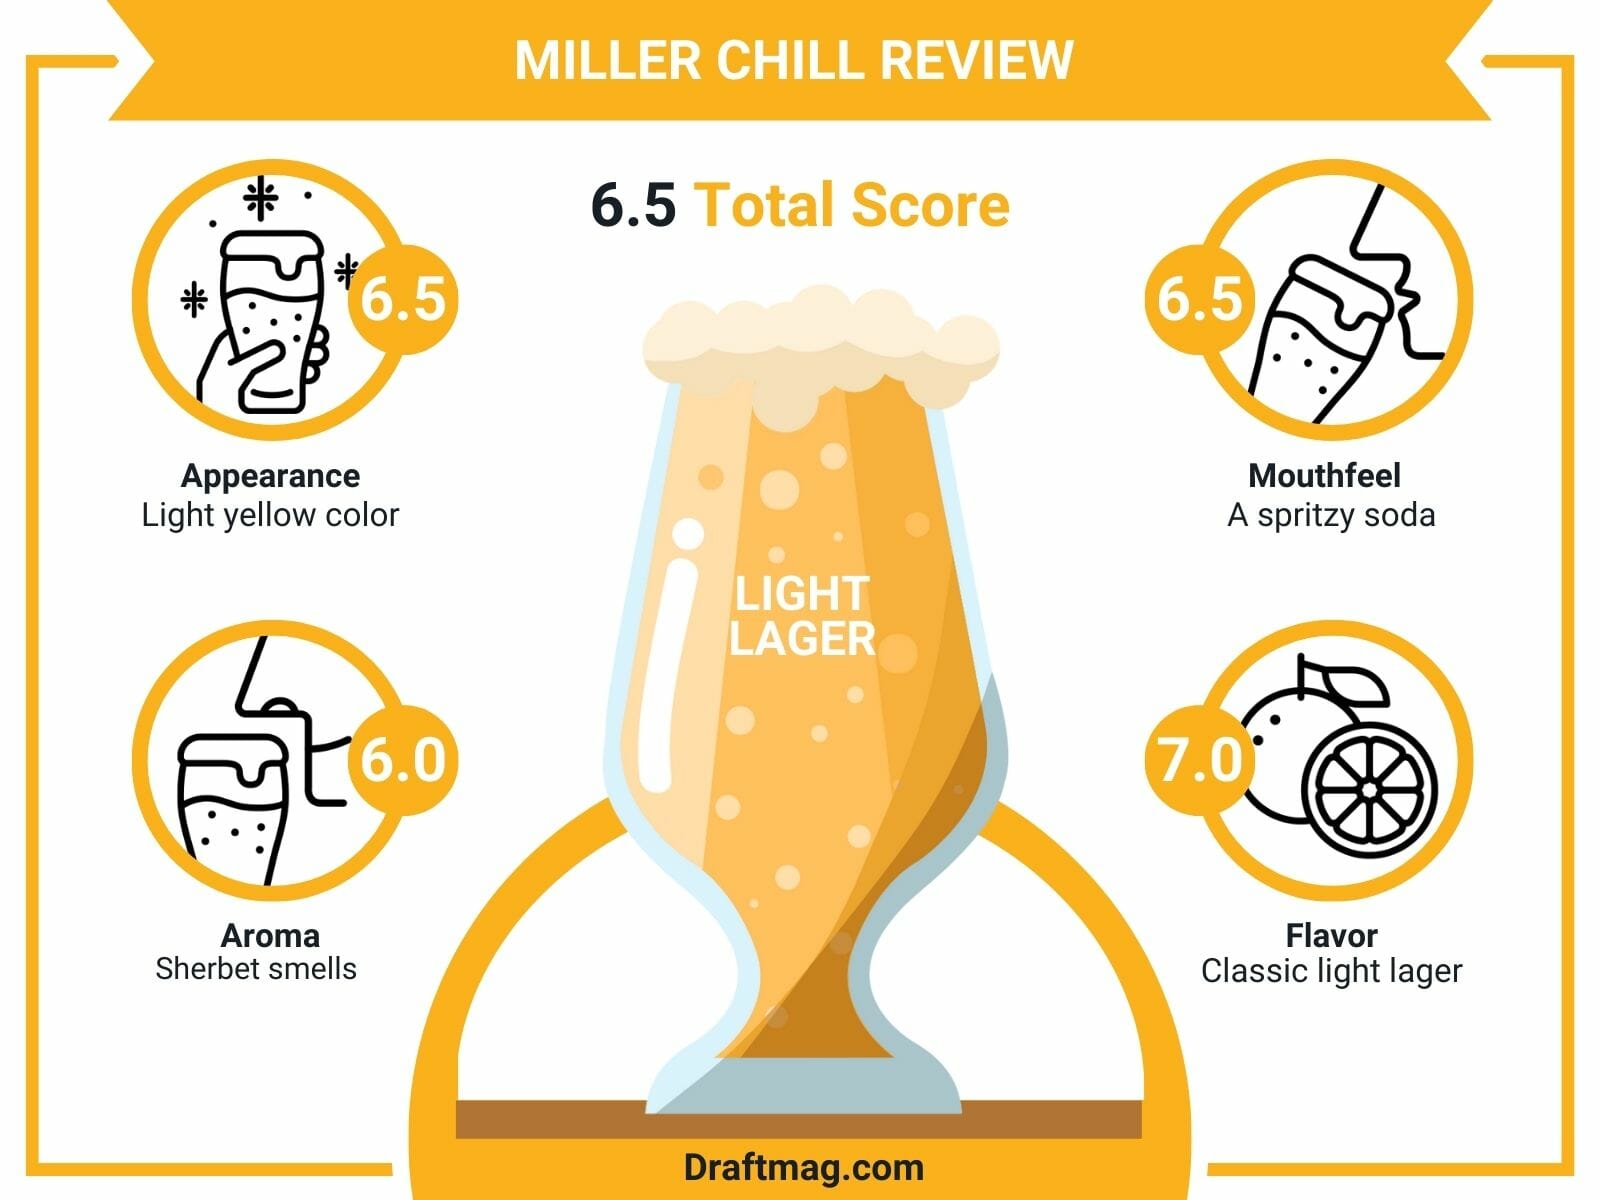 Miller Chill Review Infographic